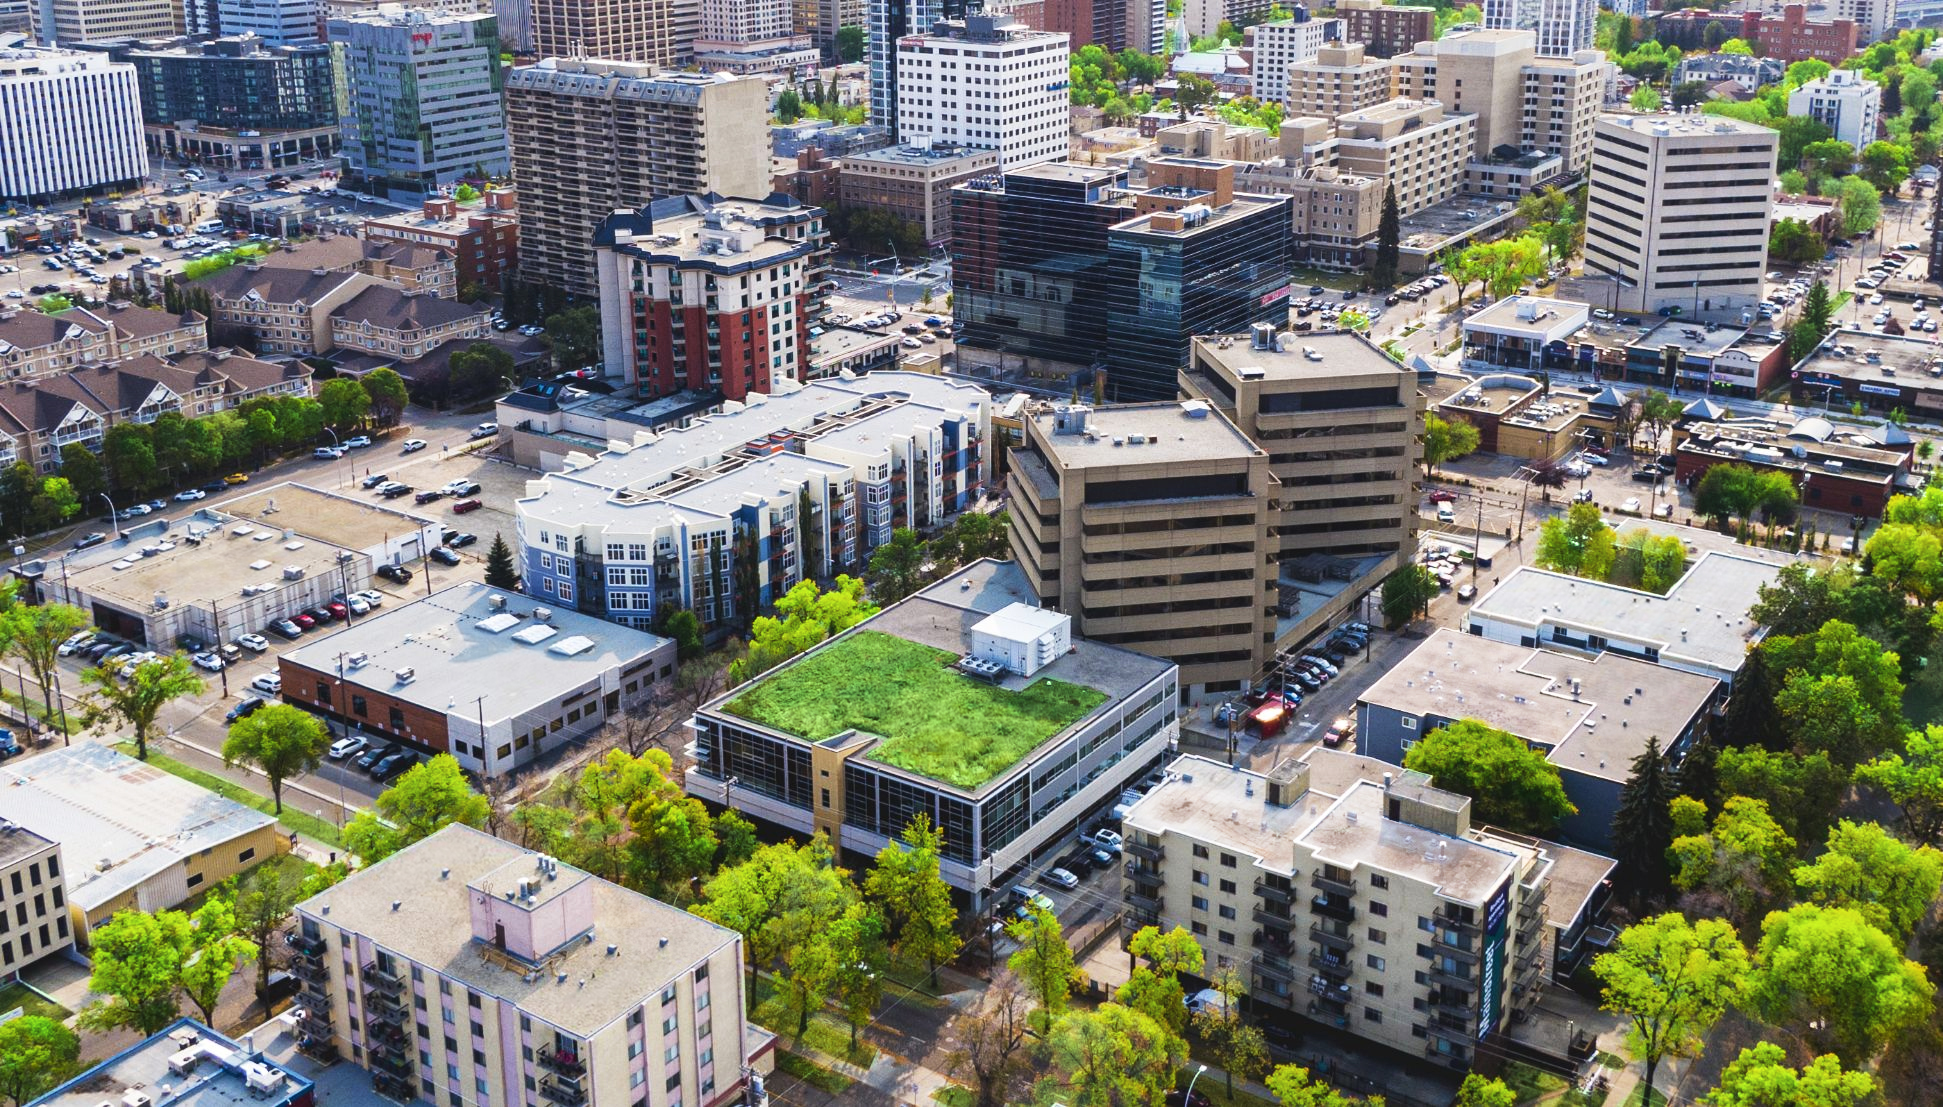 Aerial view of One Twelve Campus and many other buildings with lush green trees and grass around.